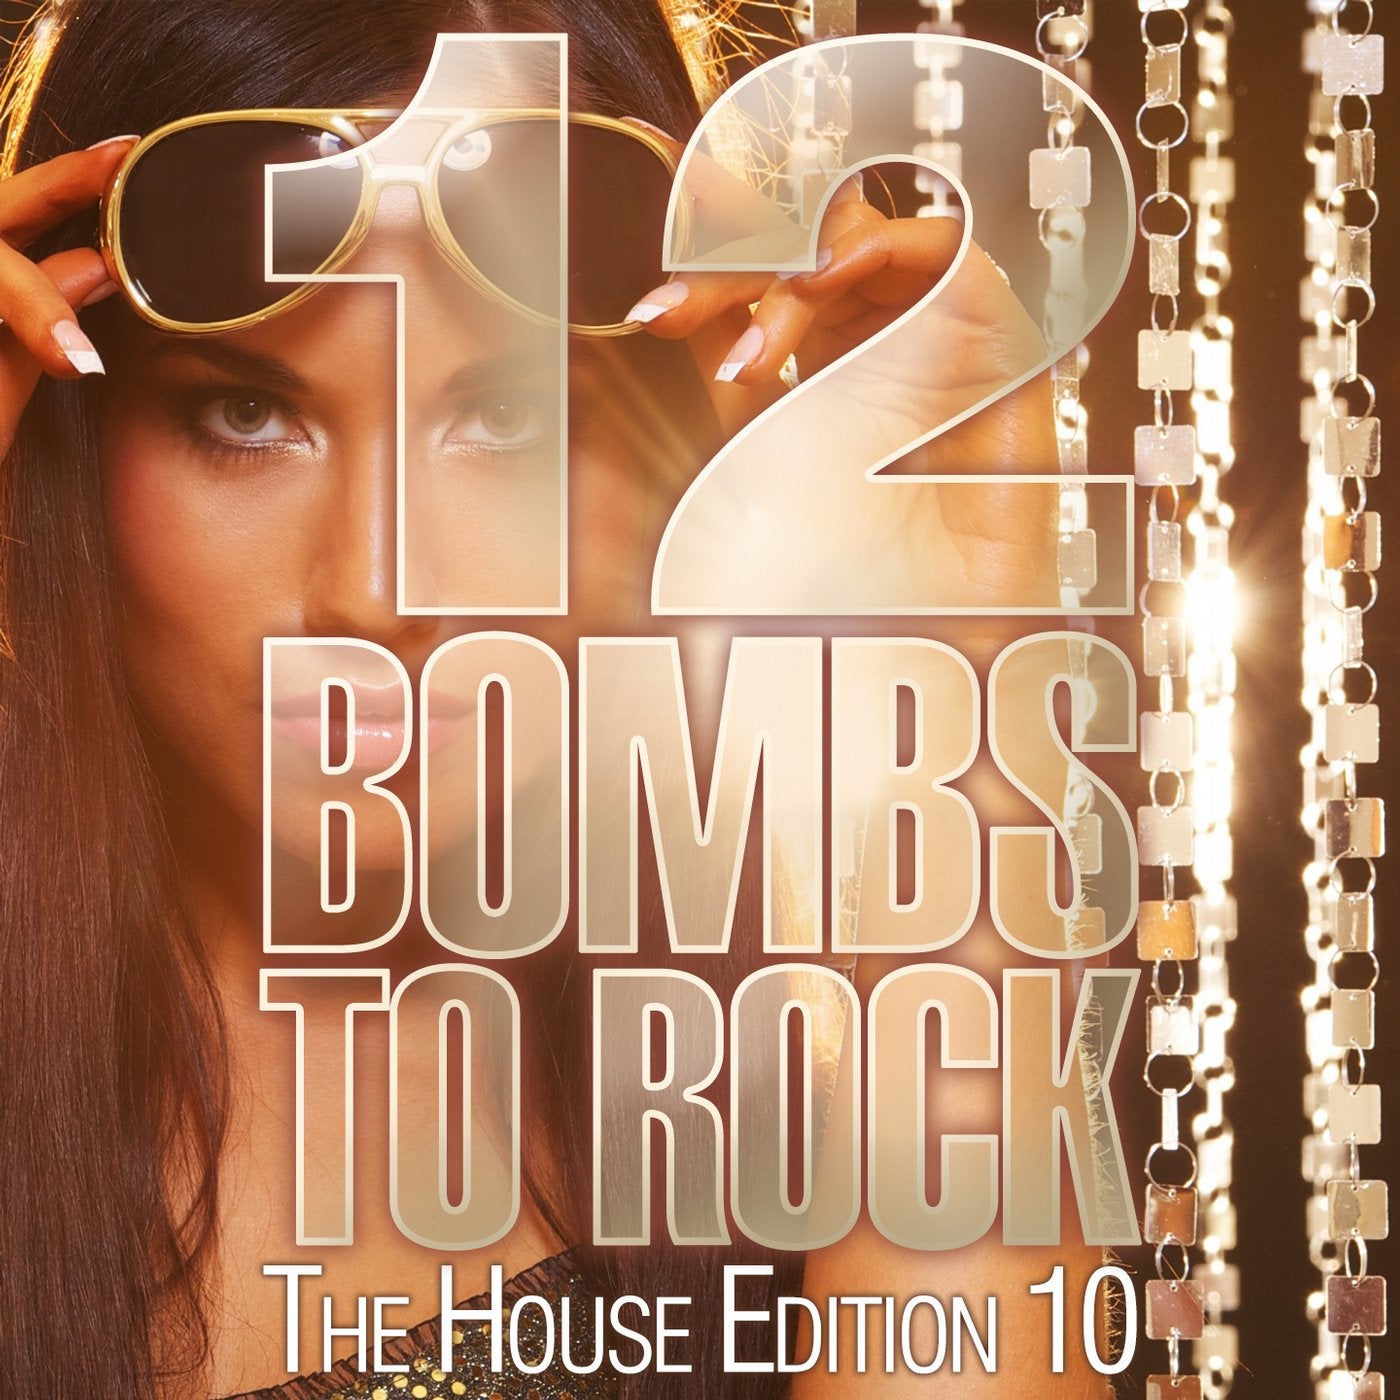 12 Bombs to Rock - The House Edition 10